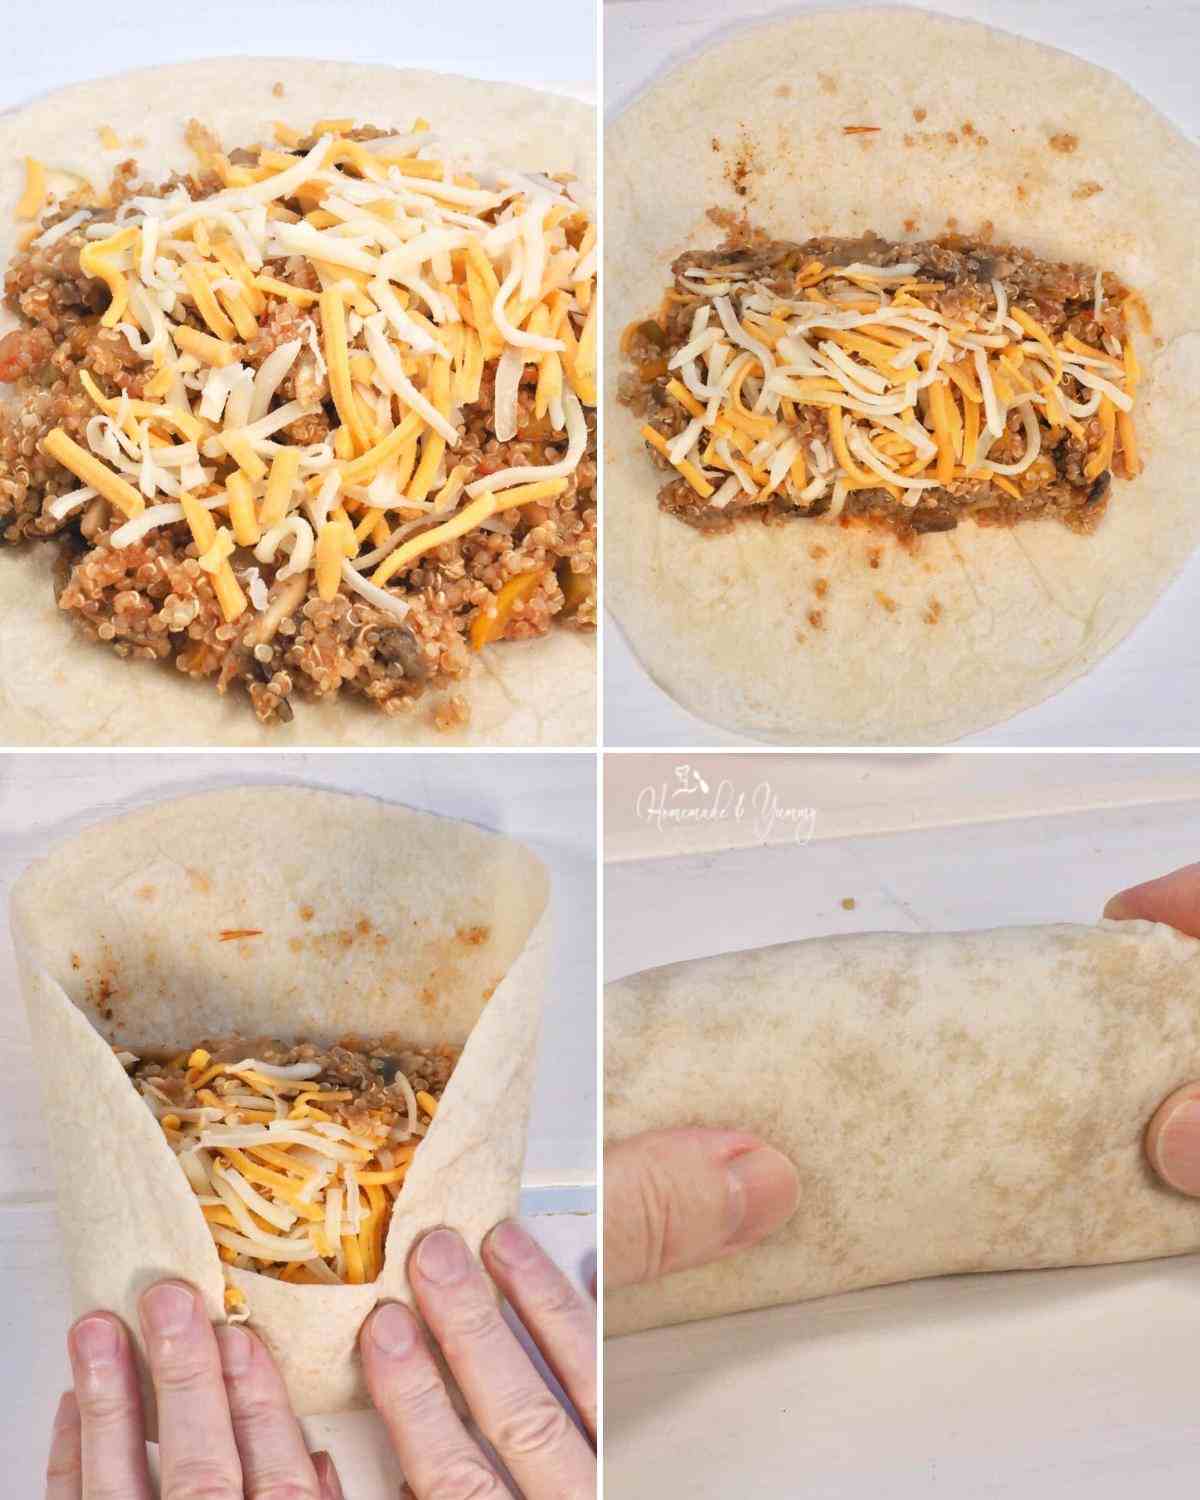 How to fill and wrap a burrito.